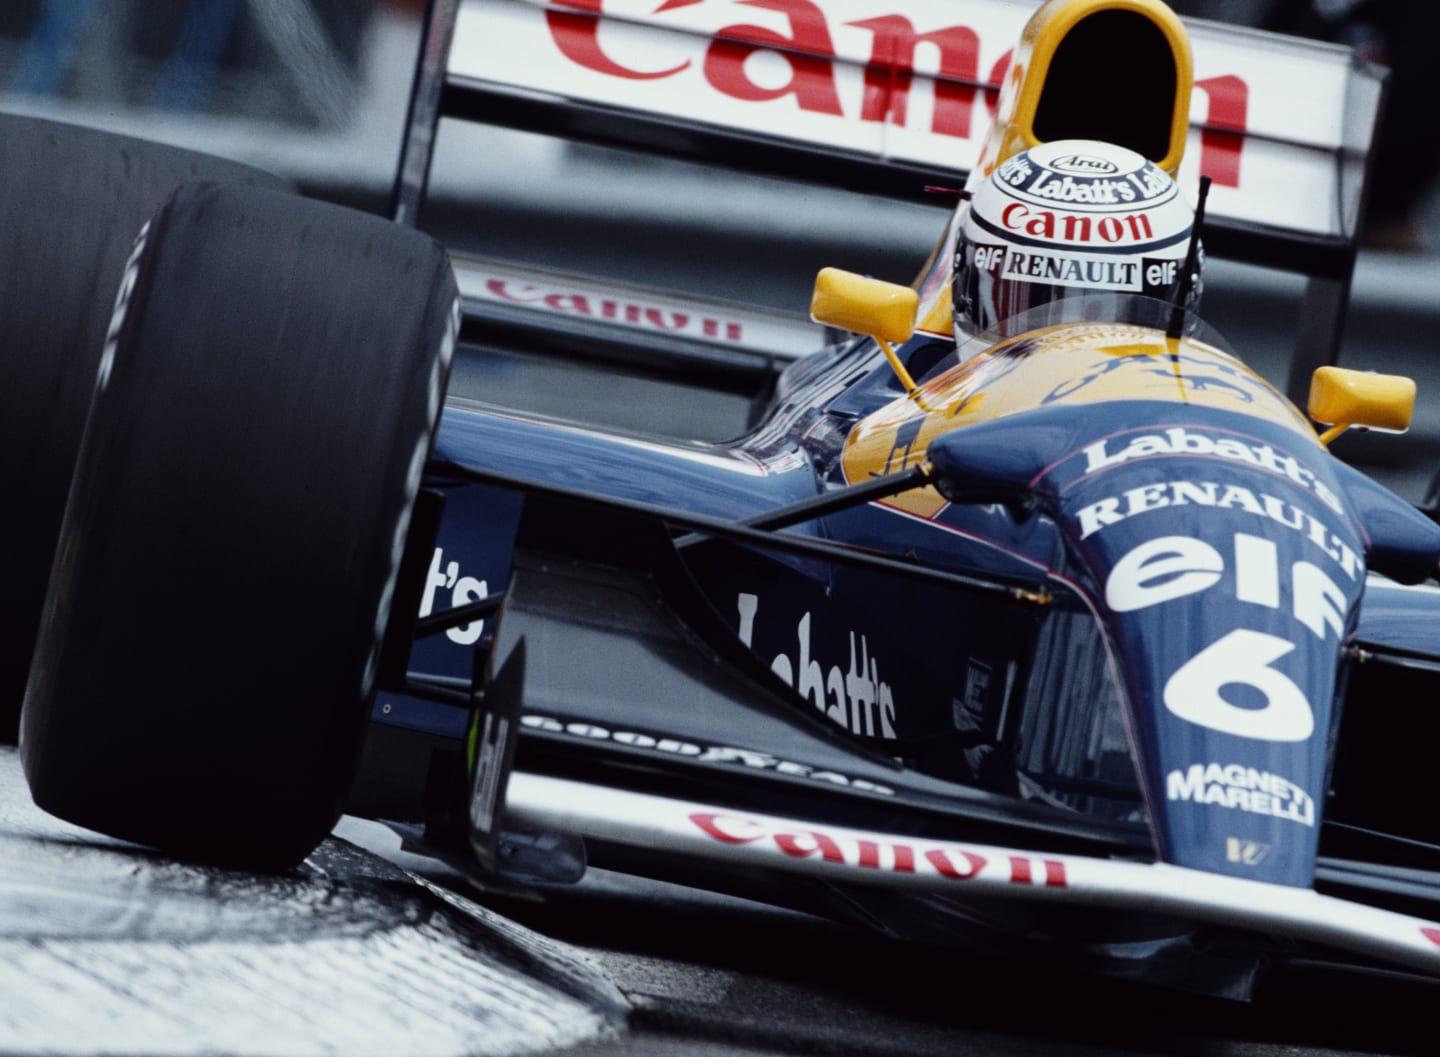 Riccardo Patrese of Italy drives the #6 Canon Williams Renault Williams FW14B Renault V10 during